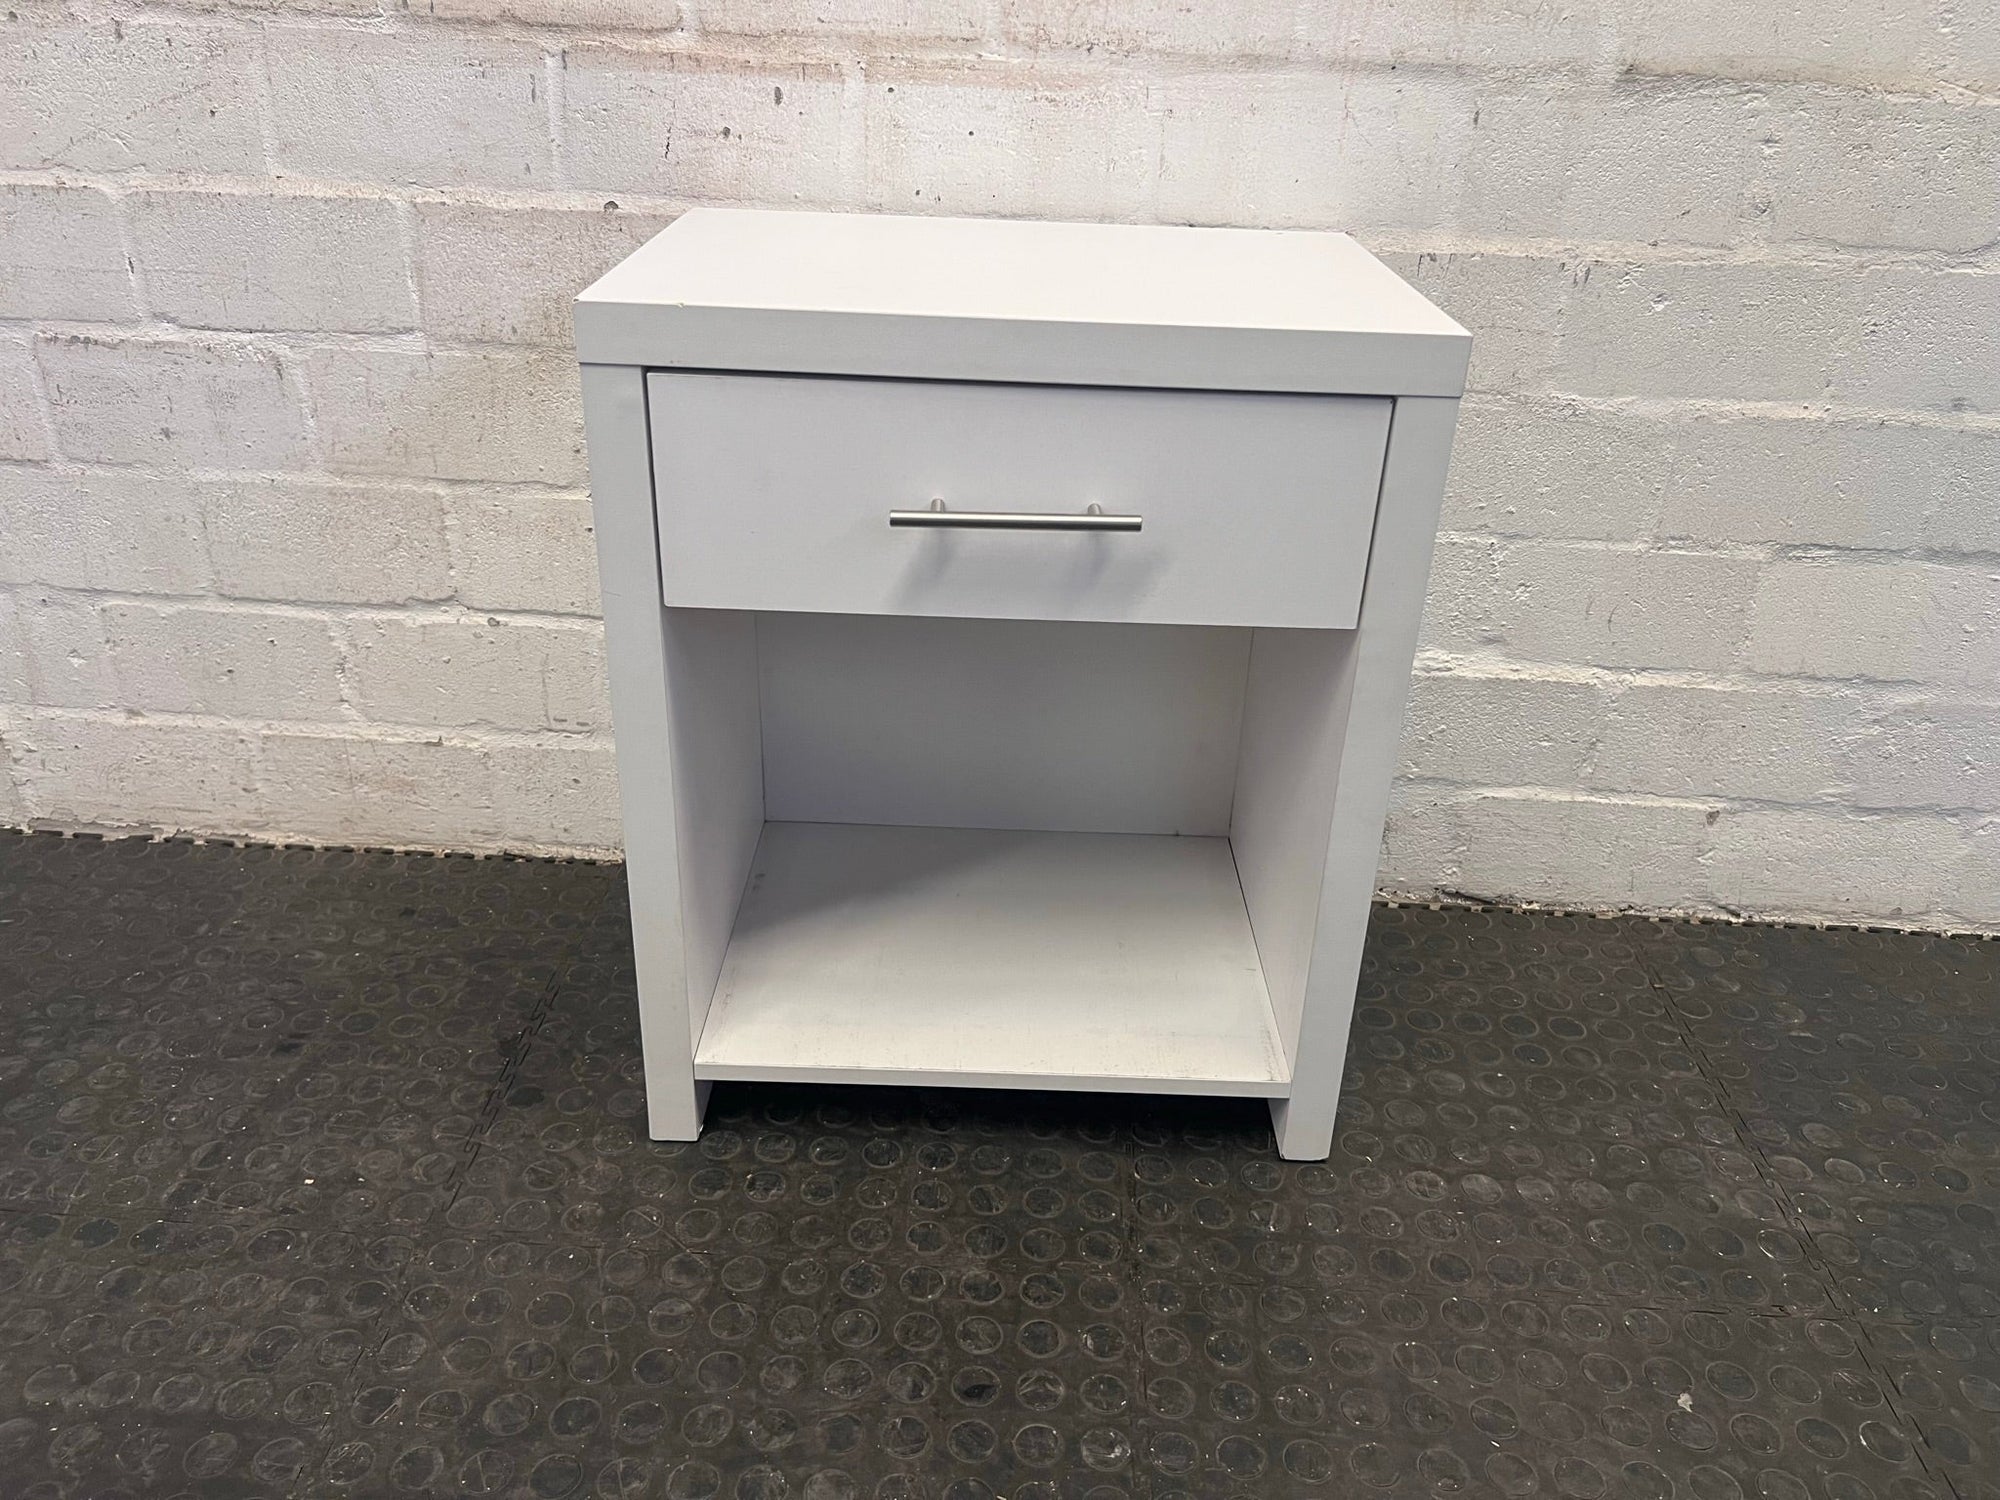 White One Drawer Bedside Table (Small Chip) - REDUCED